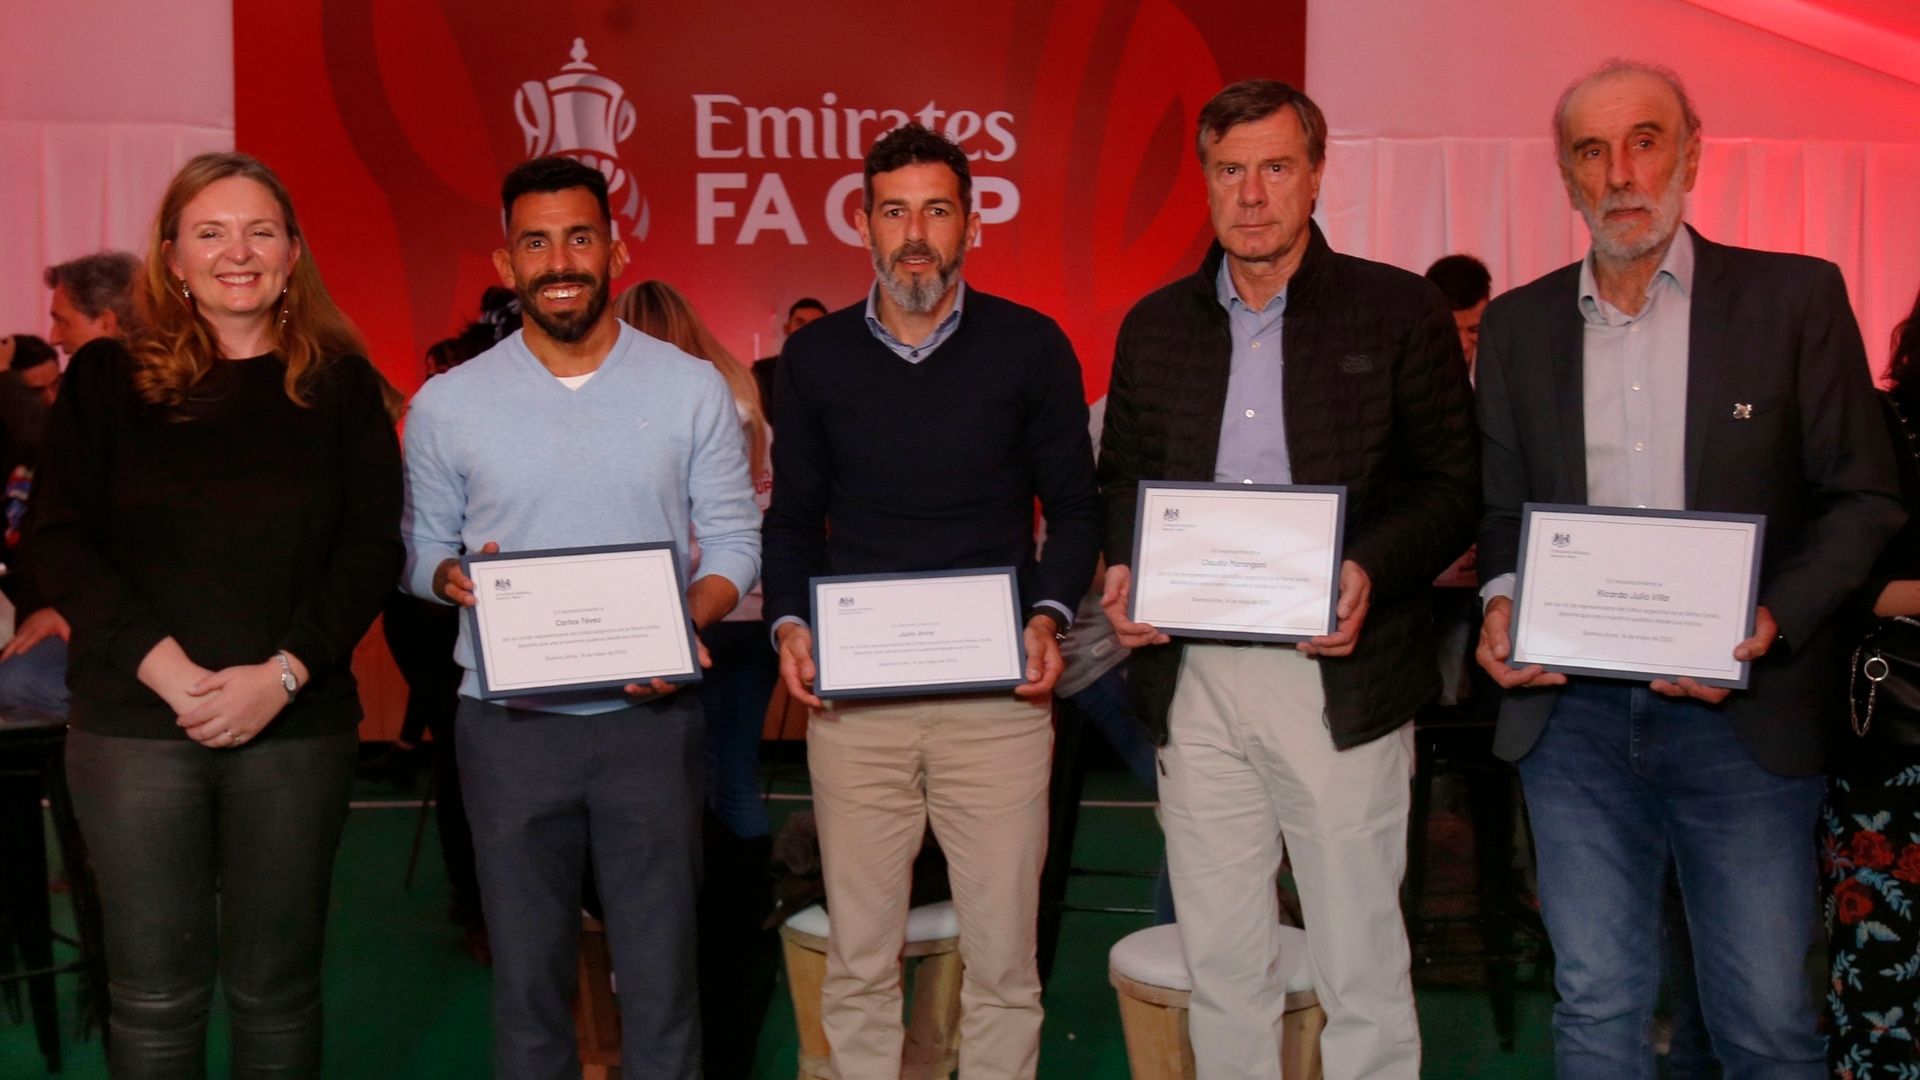 Carlos Tévez and other Argentine football players recognized by the British Embassy